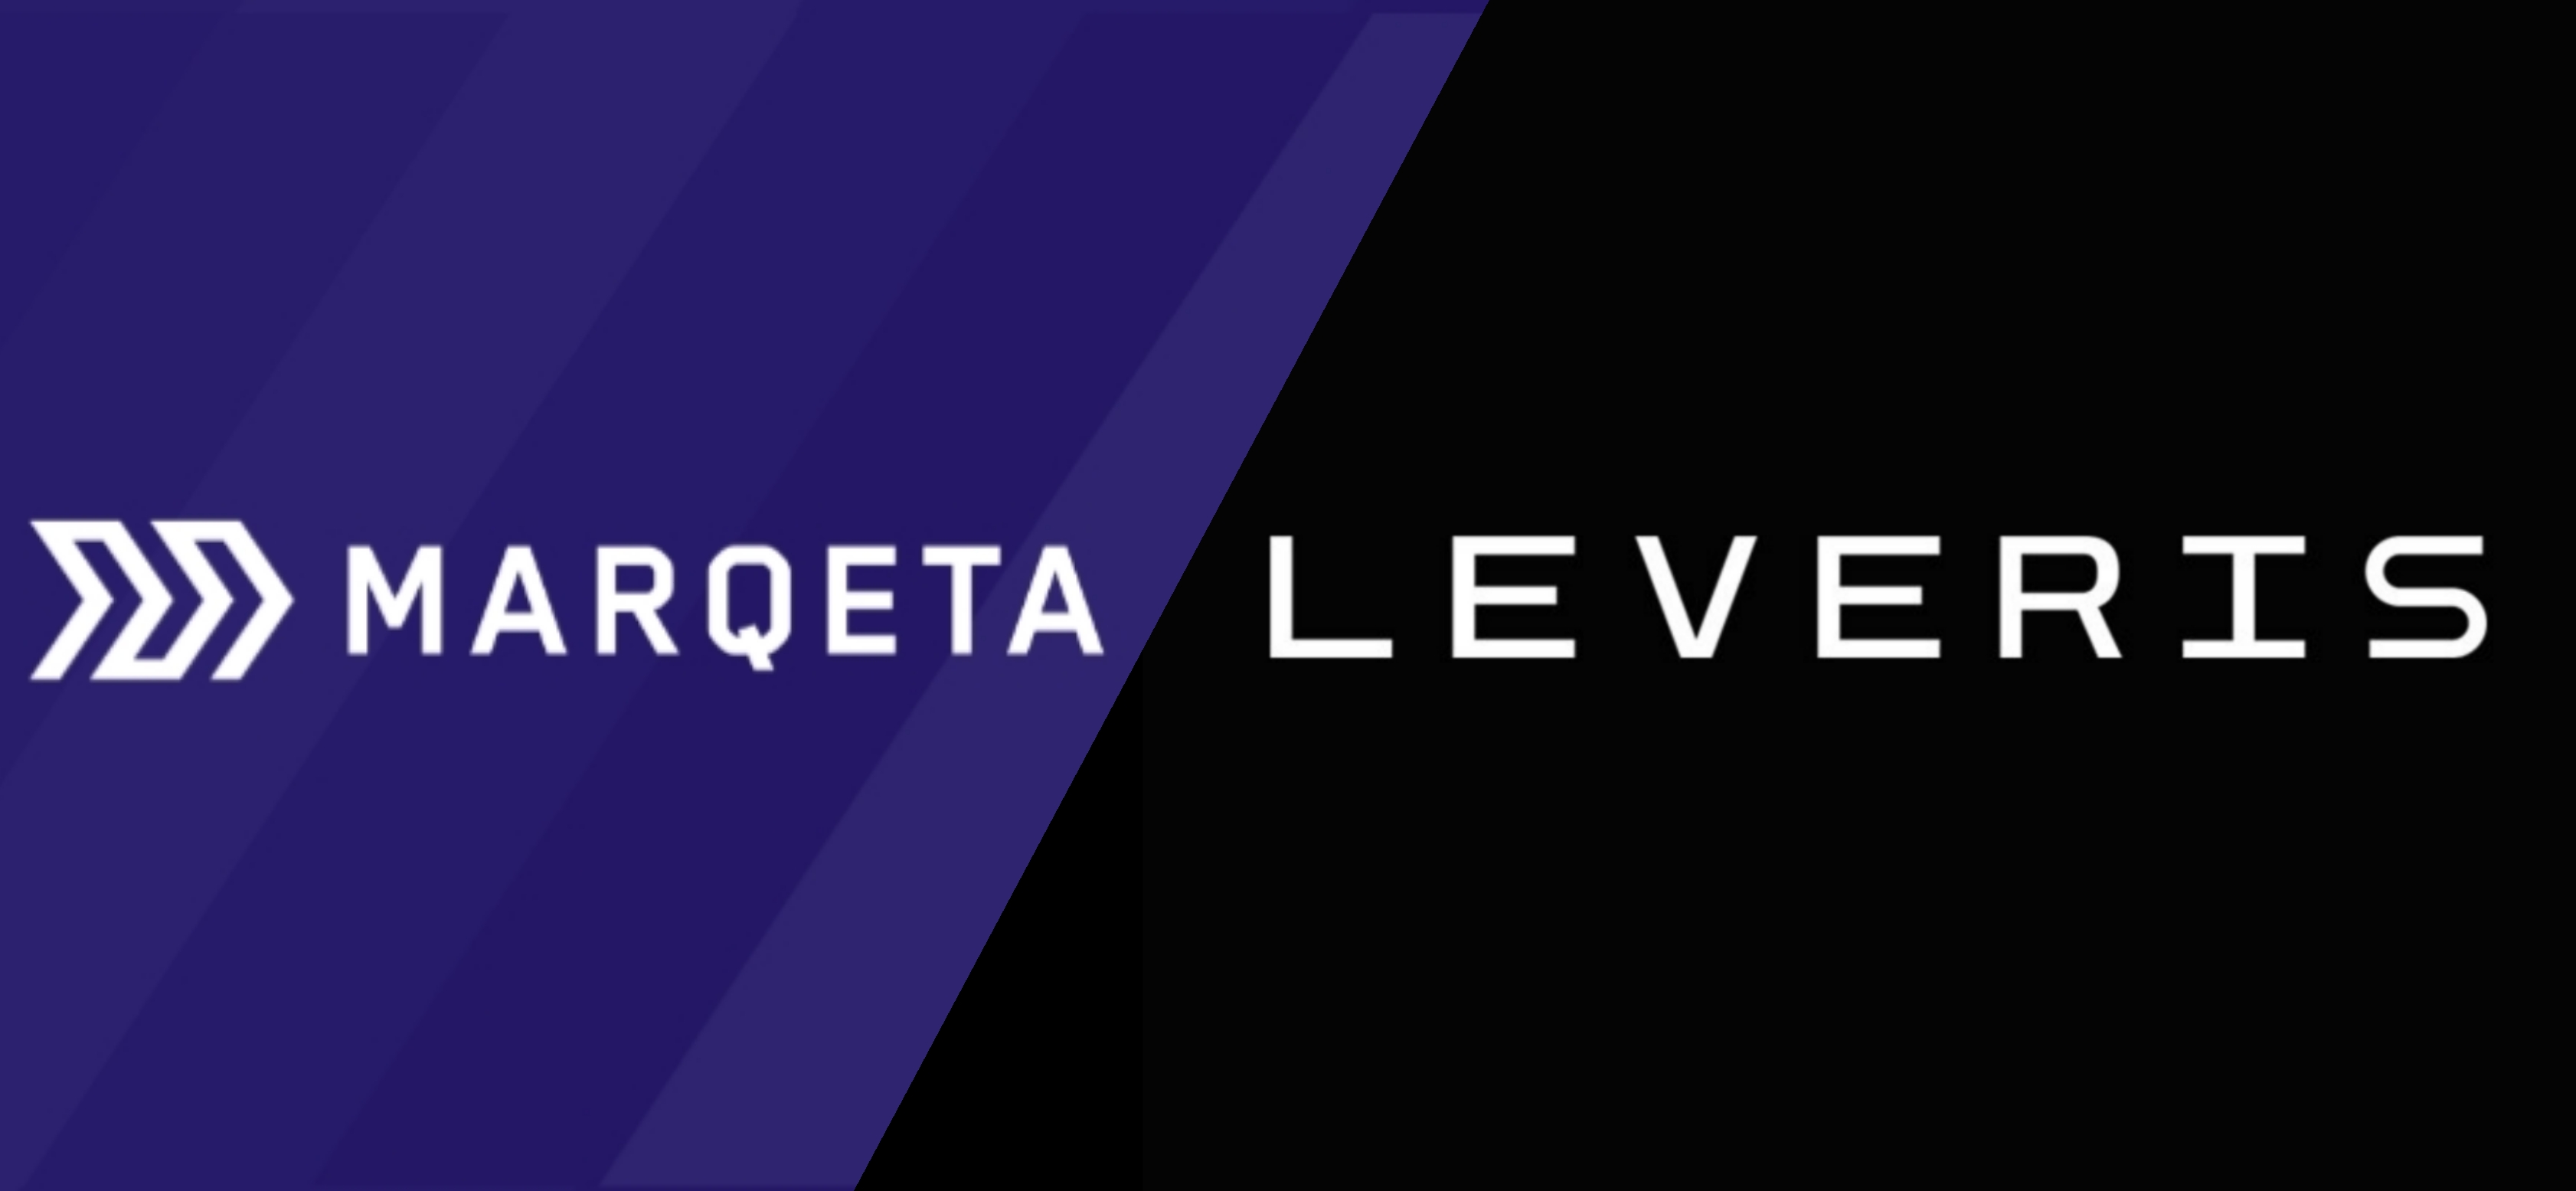 LEVERIS partners with Marqeta to bring modern card issuing to its core banking platform